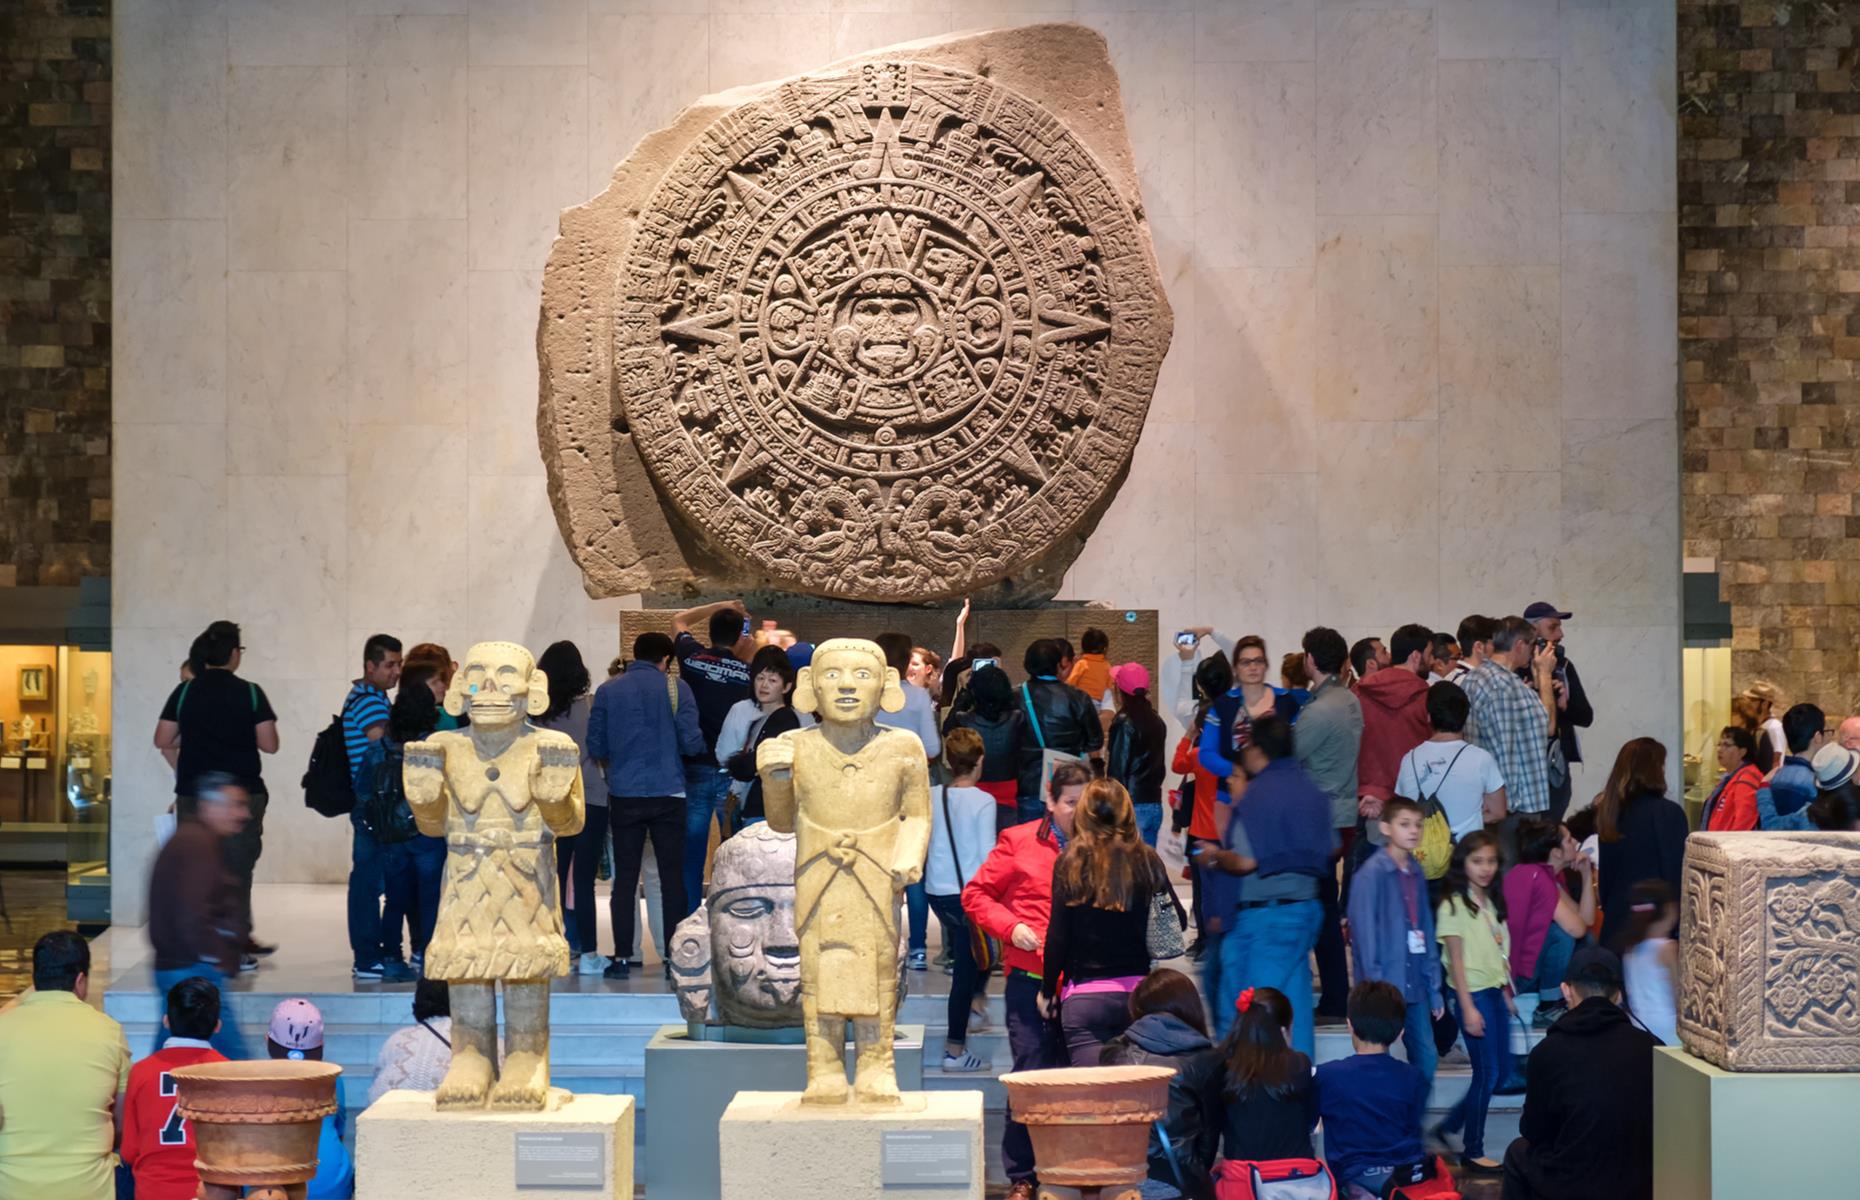 <p>With 23 exhibition halls and the world’s largest collection of ancient Mexican art, you could spend a few days at the National Museum of Anthropology in Mexico City. Laid out in chronological order, it culminates in the Aztec Hall, where you’ll find the famous Aztec Calendar or Stone Sun (pictured). Other highlights include the statue of Aztec god Xochipilli and a peacock feather and gold thread headdress made for the Aztec ruler Moctezuma II. Don’t miss the El Paraguas stone sculpture in the courtyard.</p>